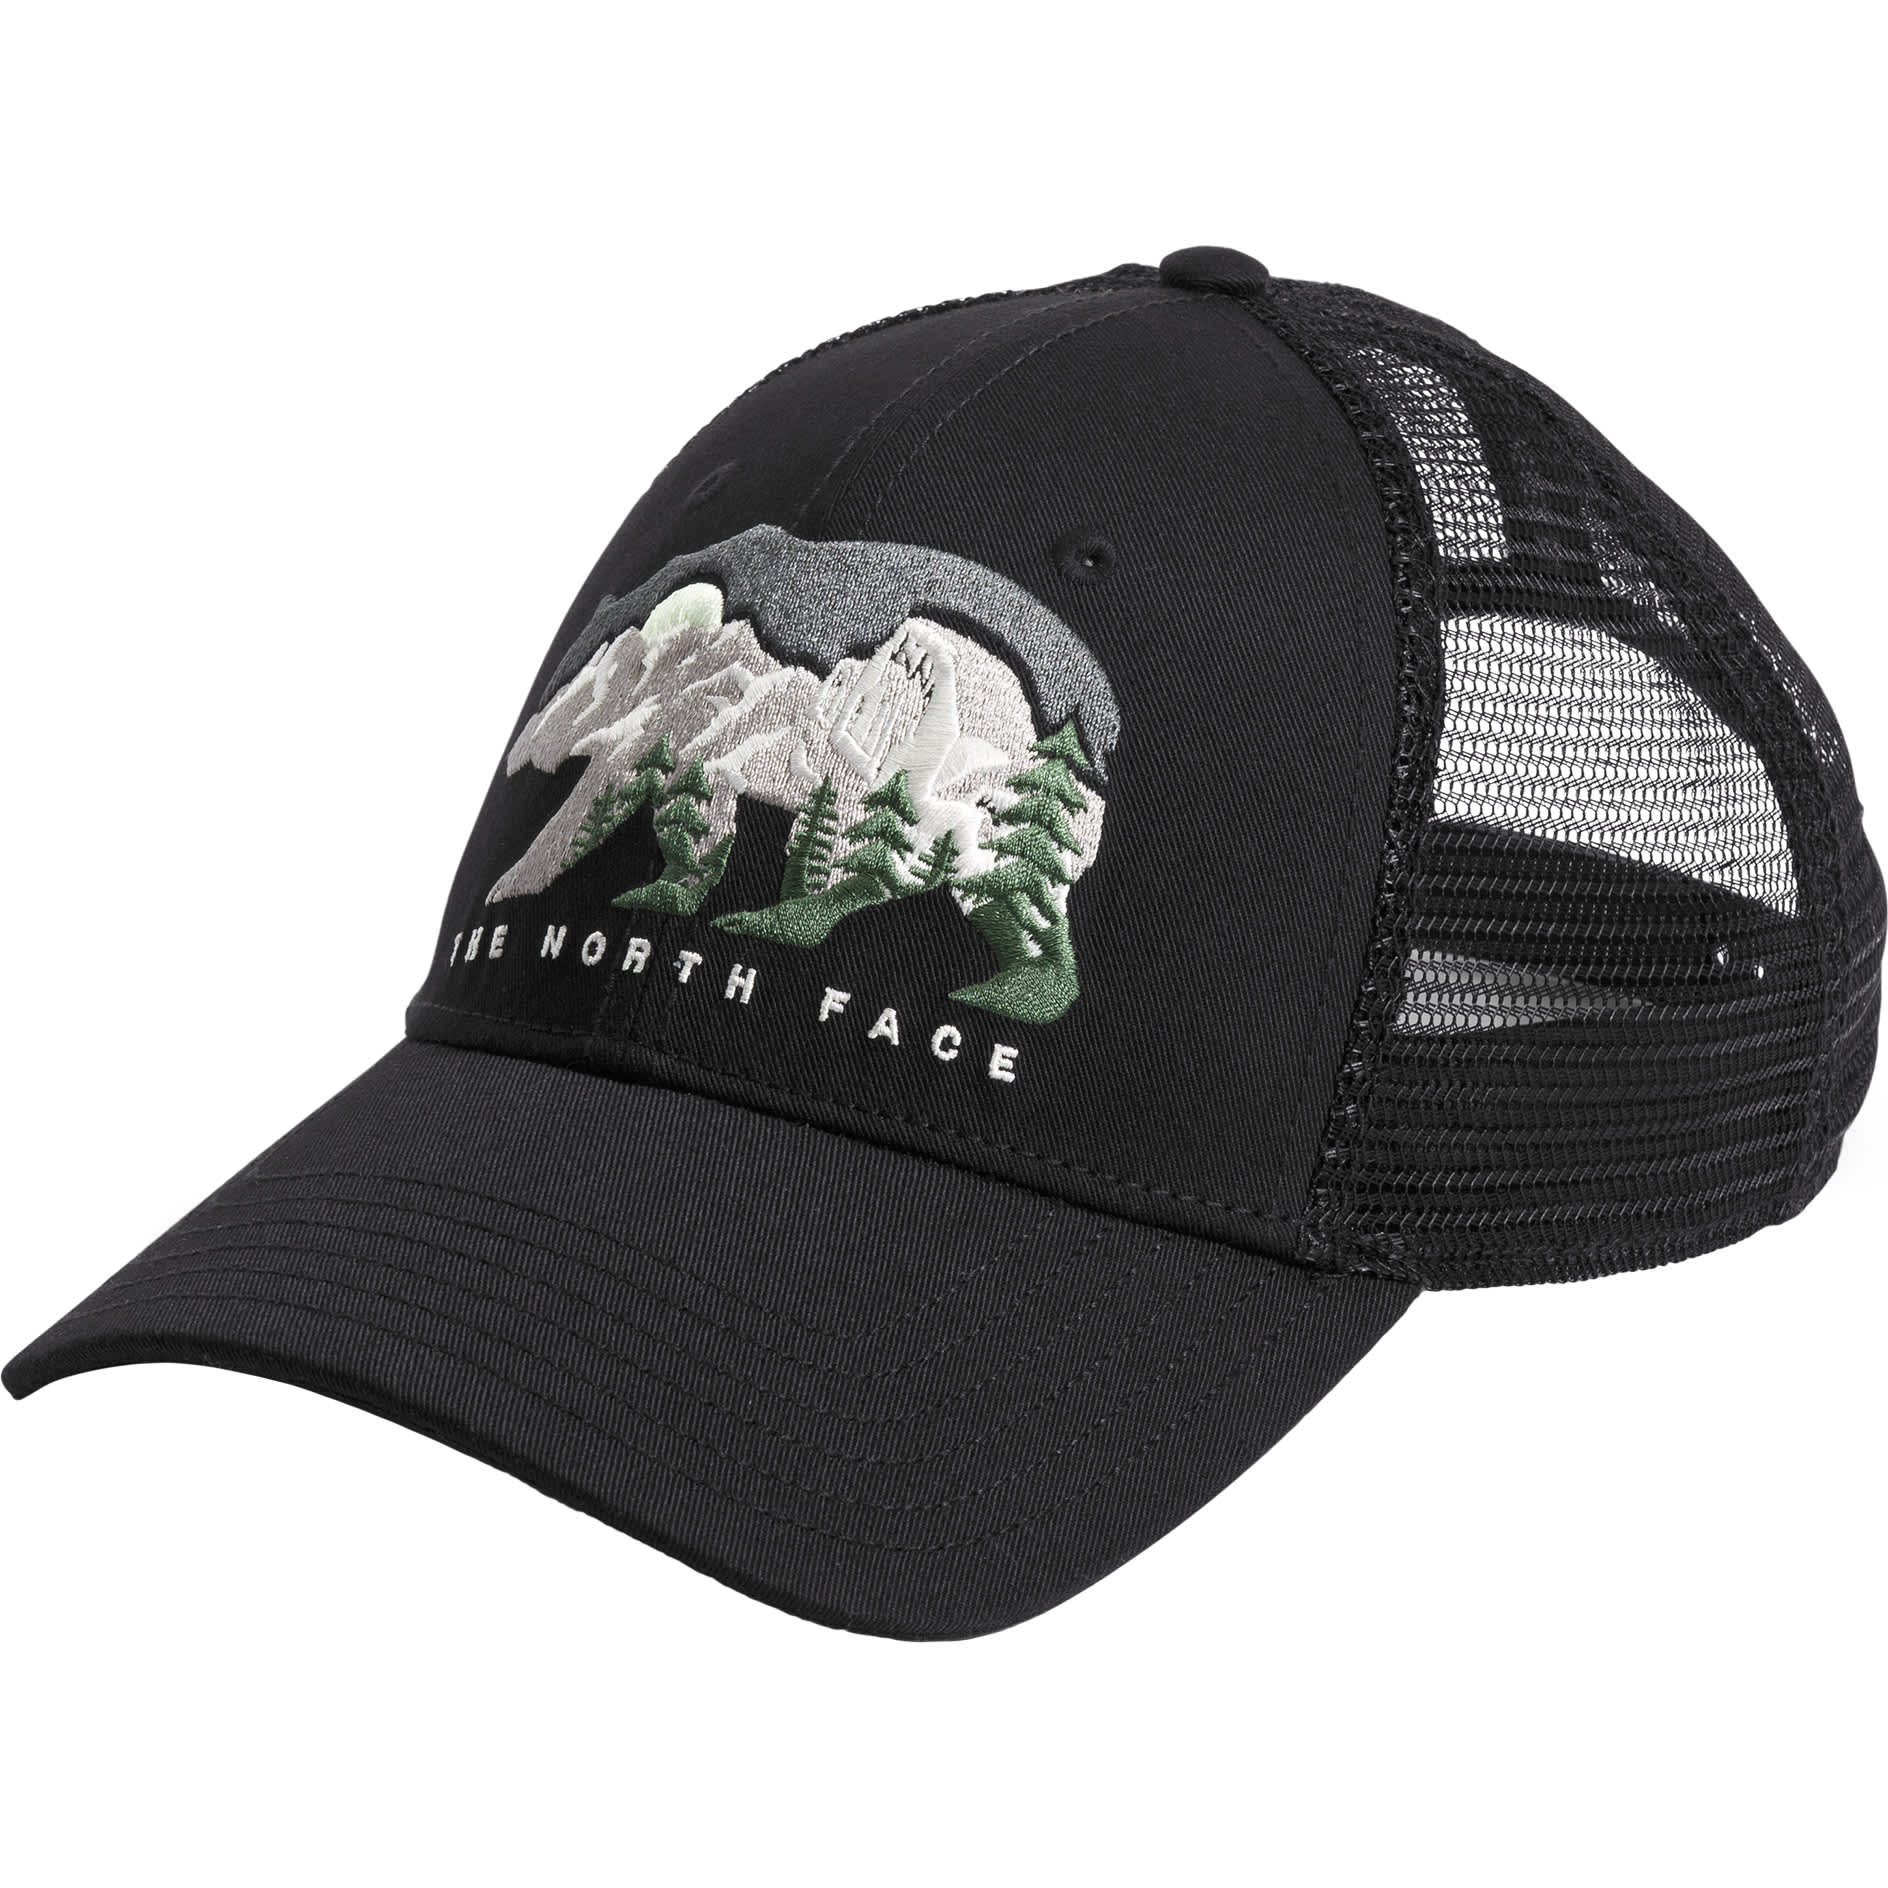 The North Face® Men’s Embroidered Mudder Trucker